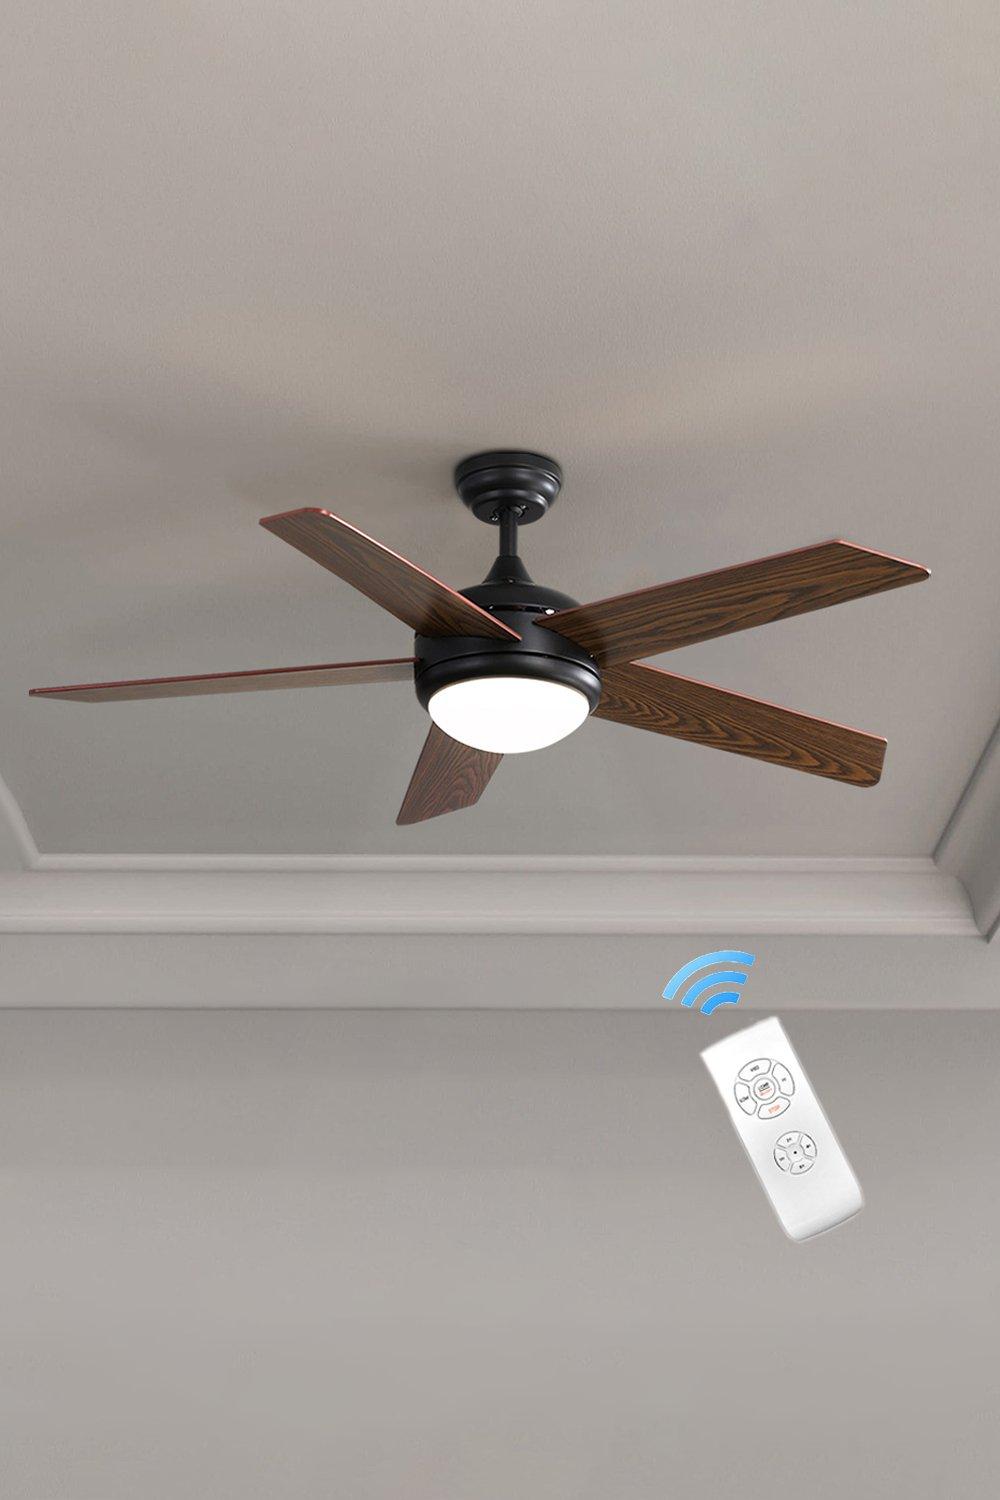 Rustic Wooden 5-Blade Ceiling Fan with LED Light